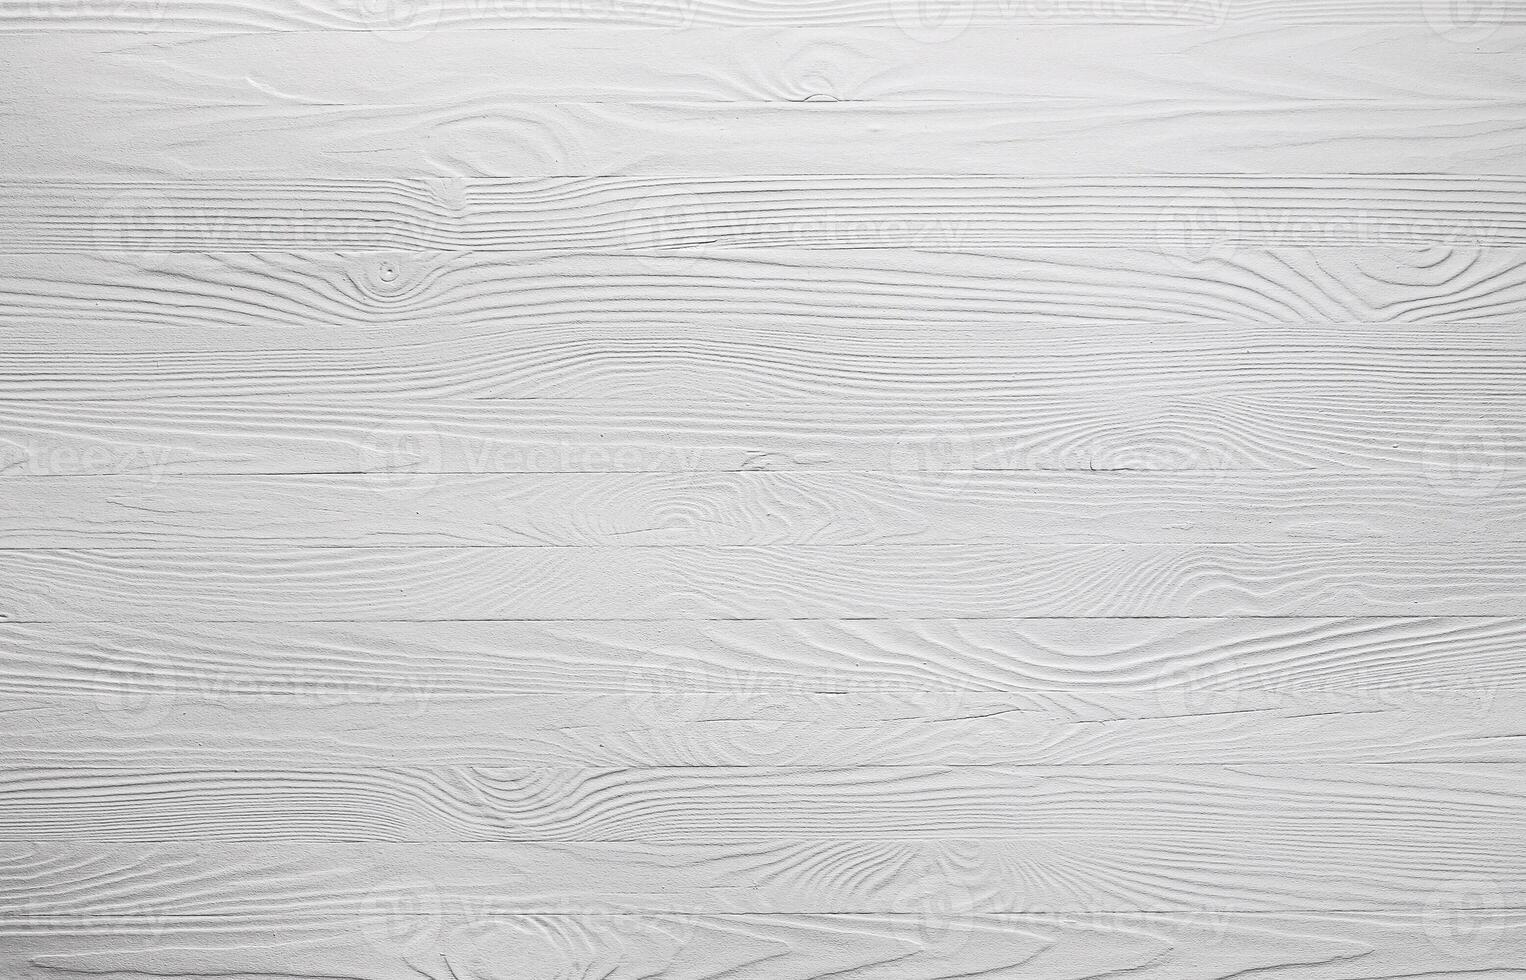 White wooden background, rustic white planks texture photo